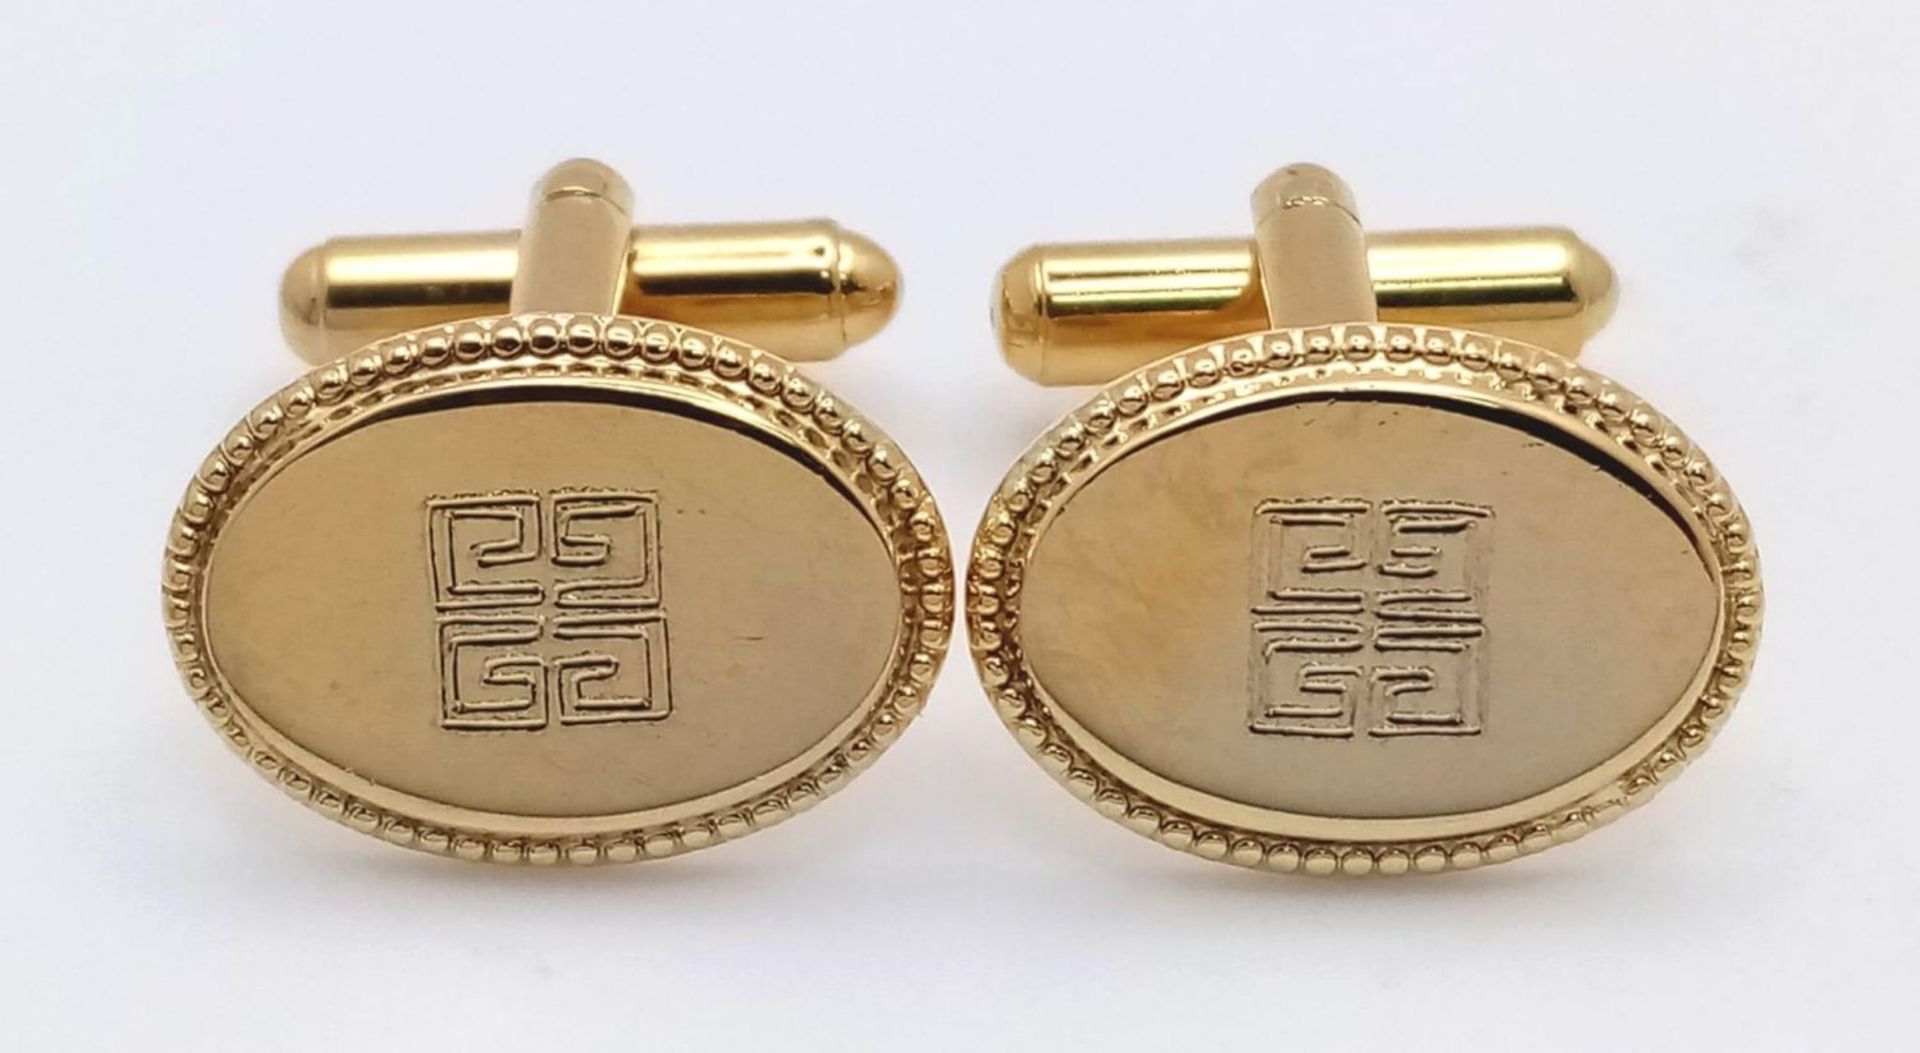 An Excellent Condition Pair of Vintage Givenchy Gold Tone Cufflinks in Original Box. Lever Action, - Image 3 of 8